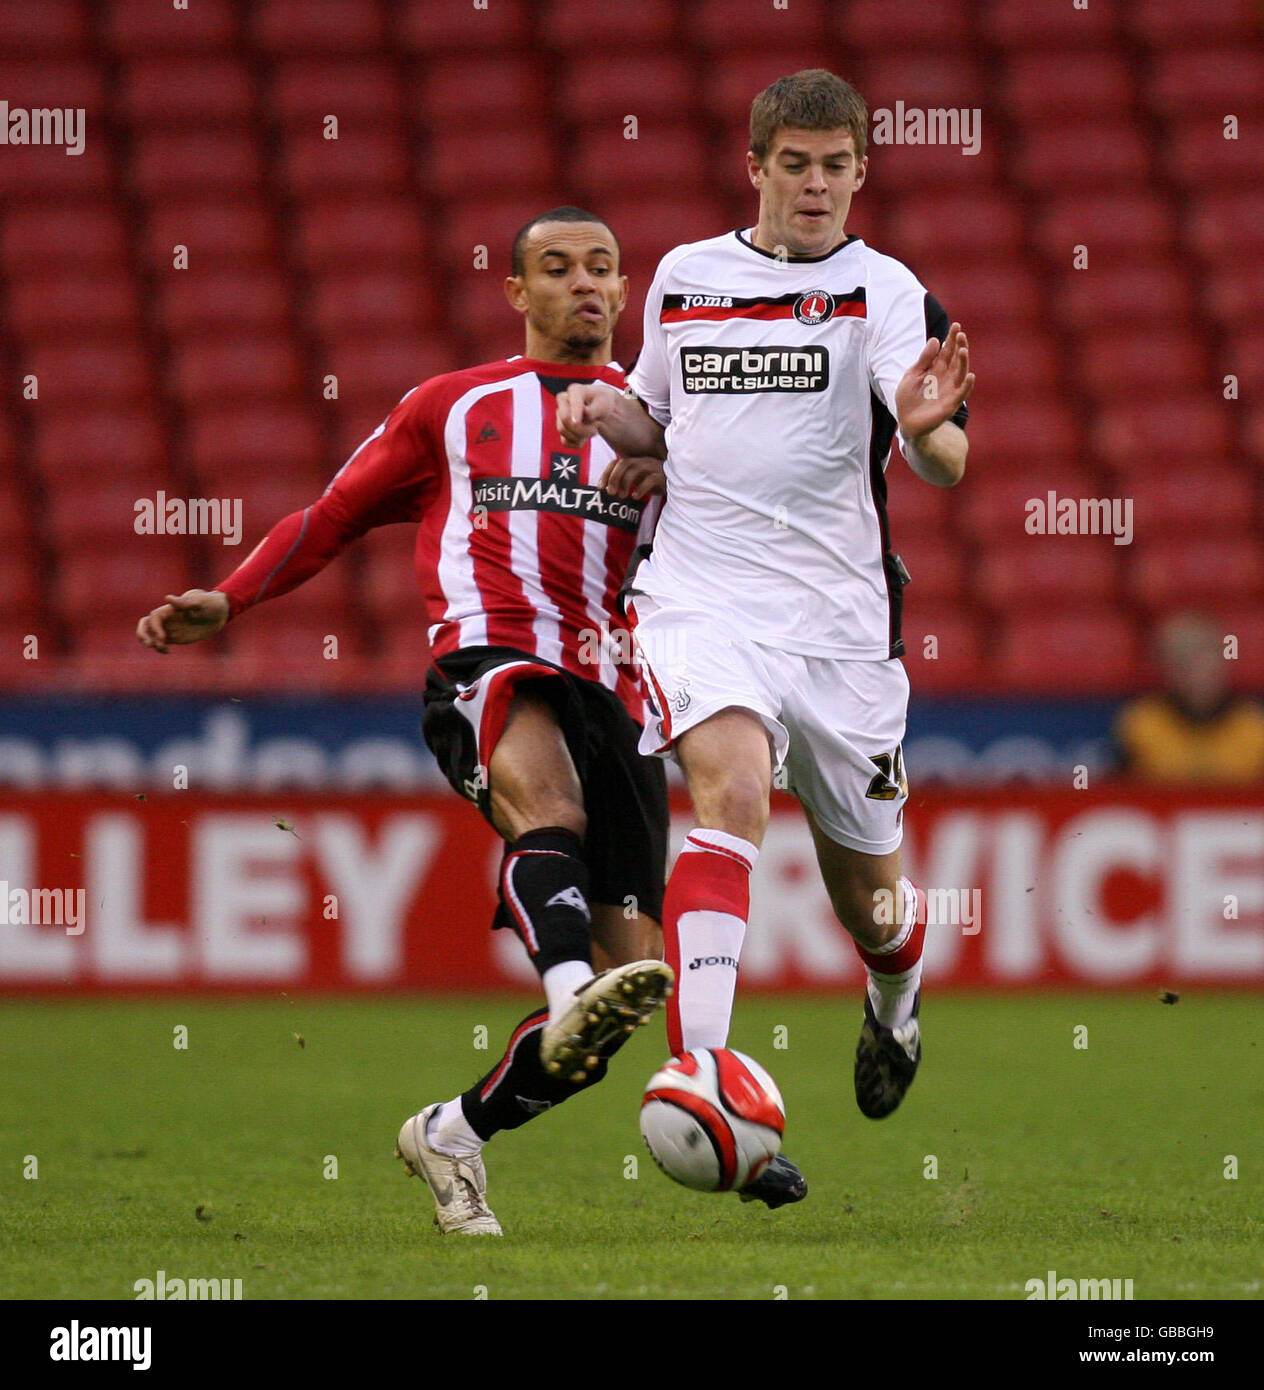 Sheffield United's Danny Webber and Charlton Athletic's Martin Cranie during the Coca-Cola Championship match at Bramall Lane, Sheffield. Stock Photo